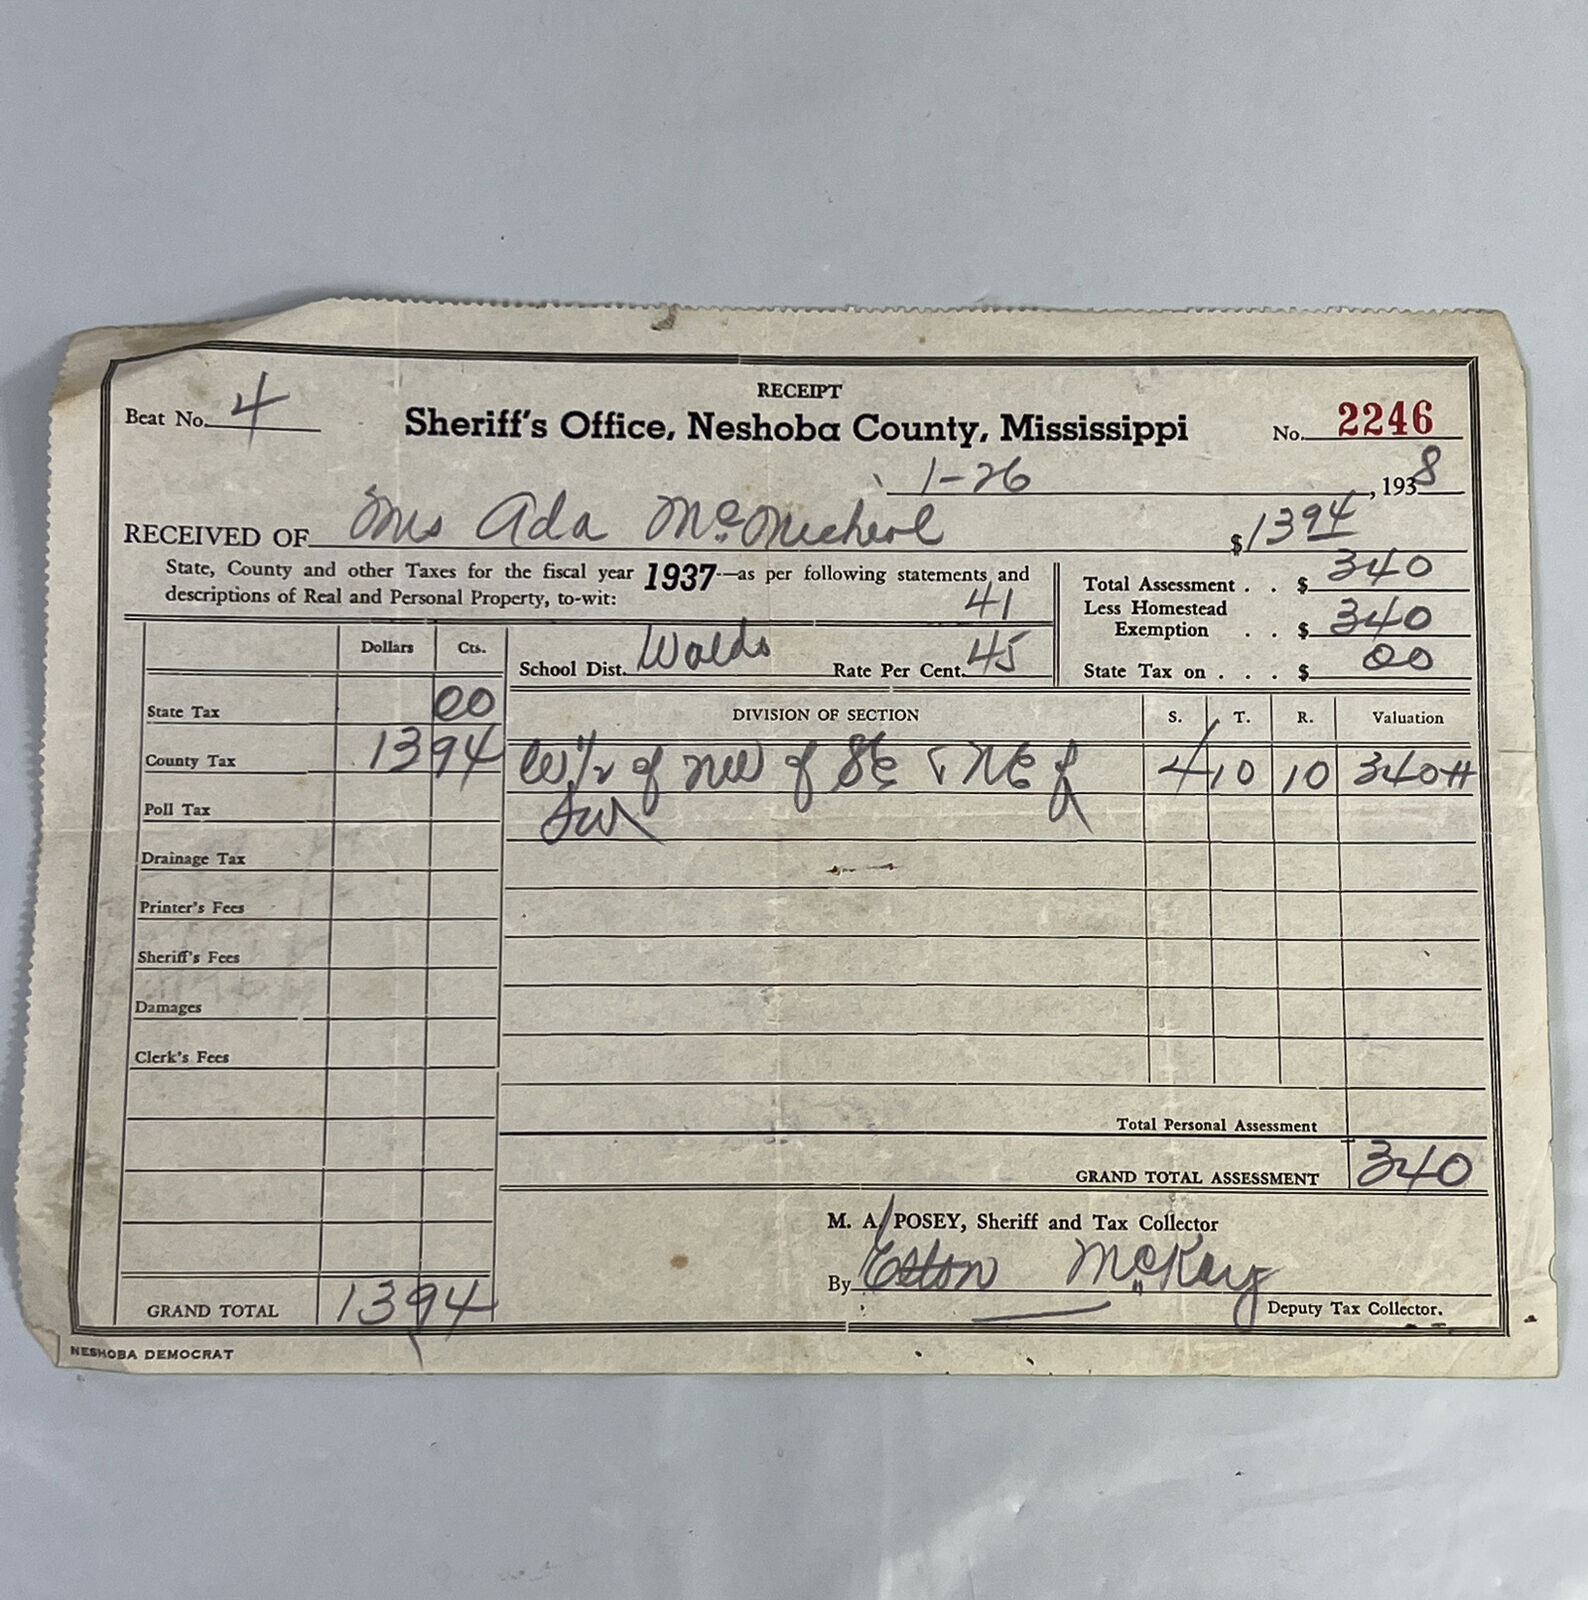 Neshoba County Mississippi 1938 M.A. Posey Sheriff & Tax Collector 1938 Receipt